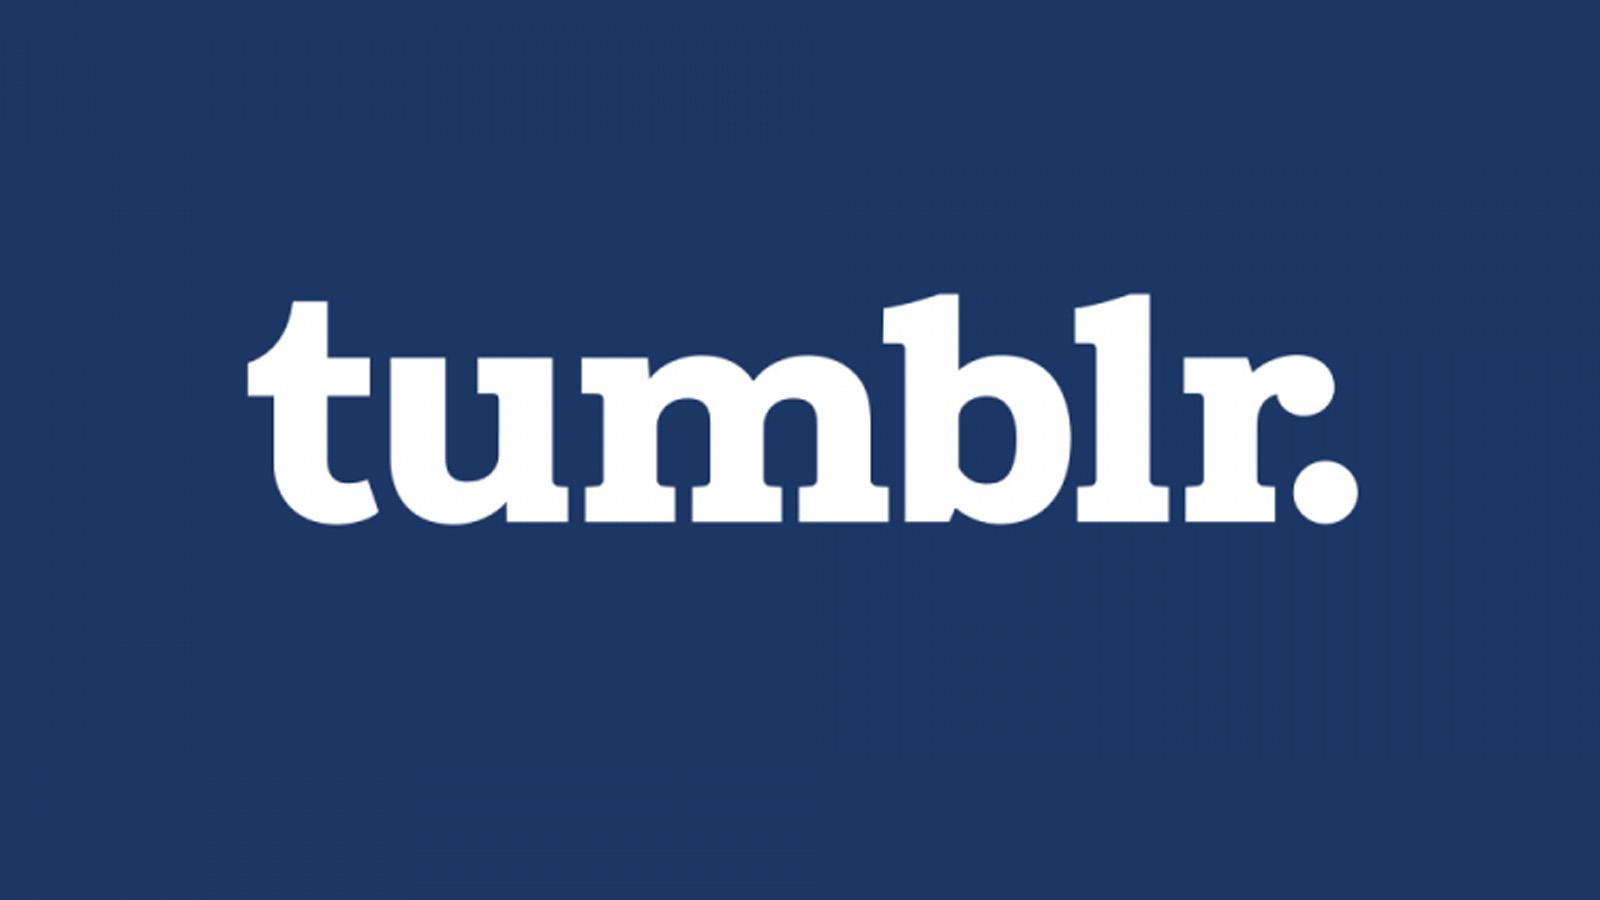 Live streaming comes to Tumblr: Here's how it works - Times of India